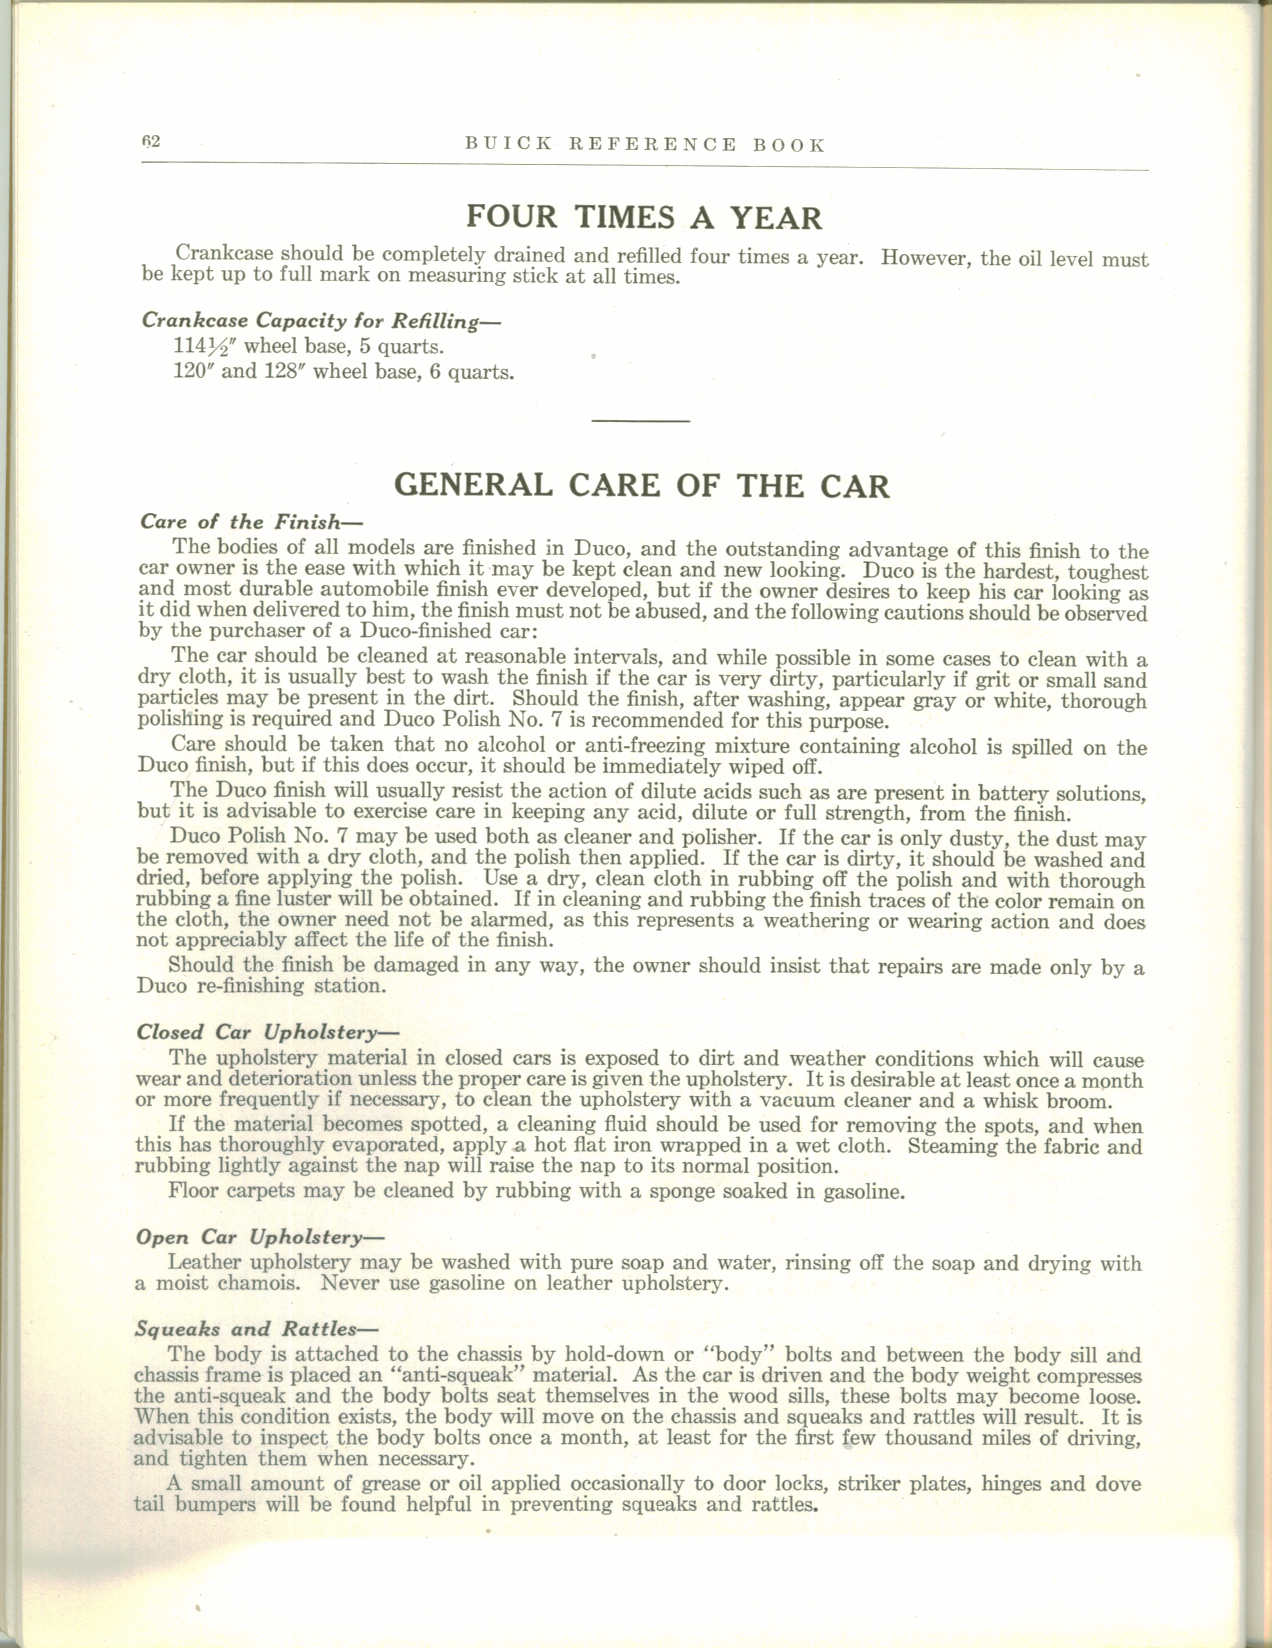 1928 Buick Reference Book-62